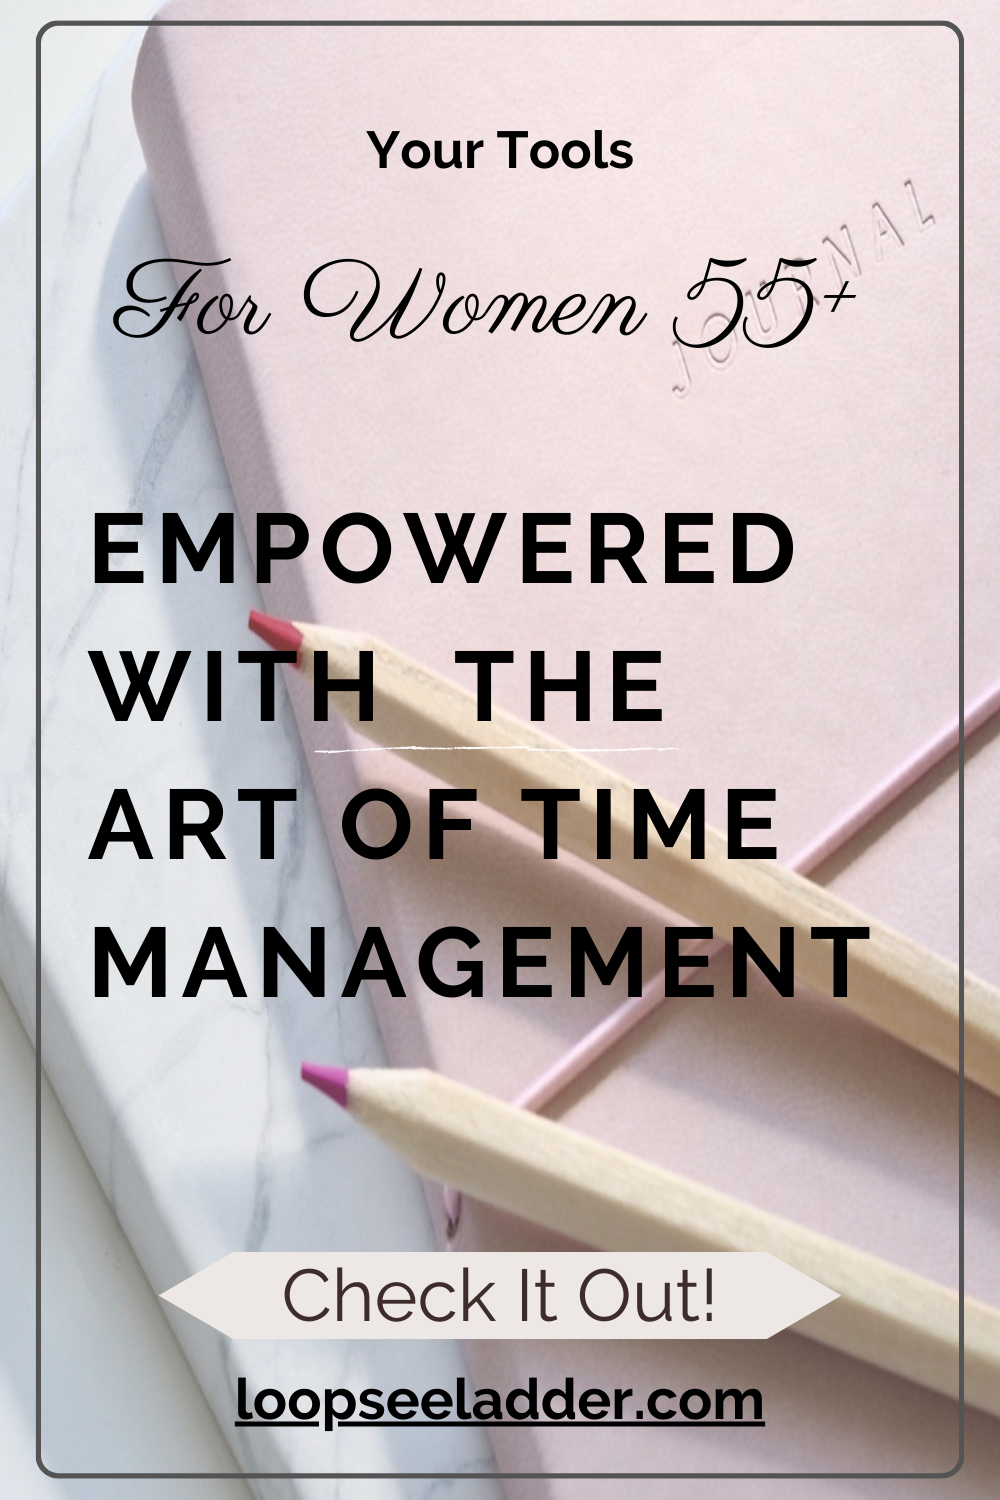 From Overwhelmed to Empowered: How Women Over 55 Can Master the Art of Time Management